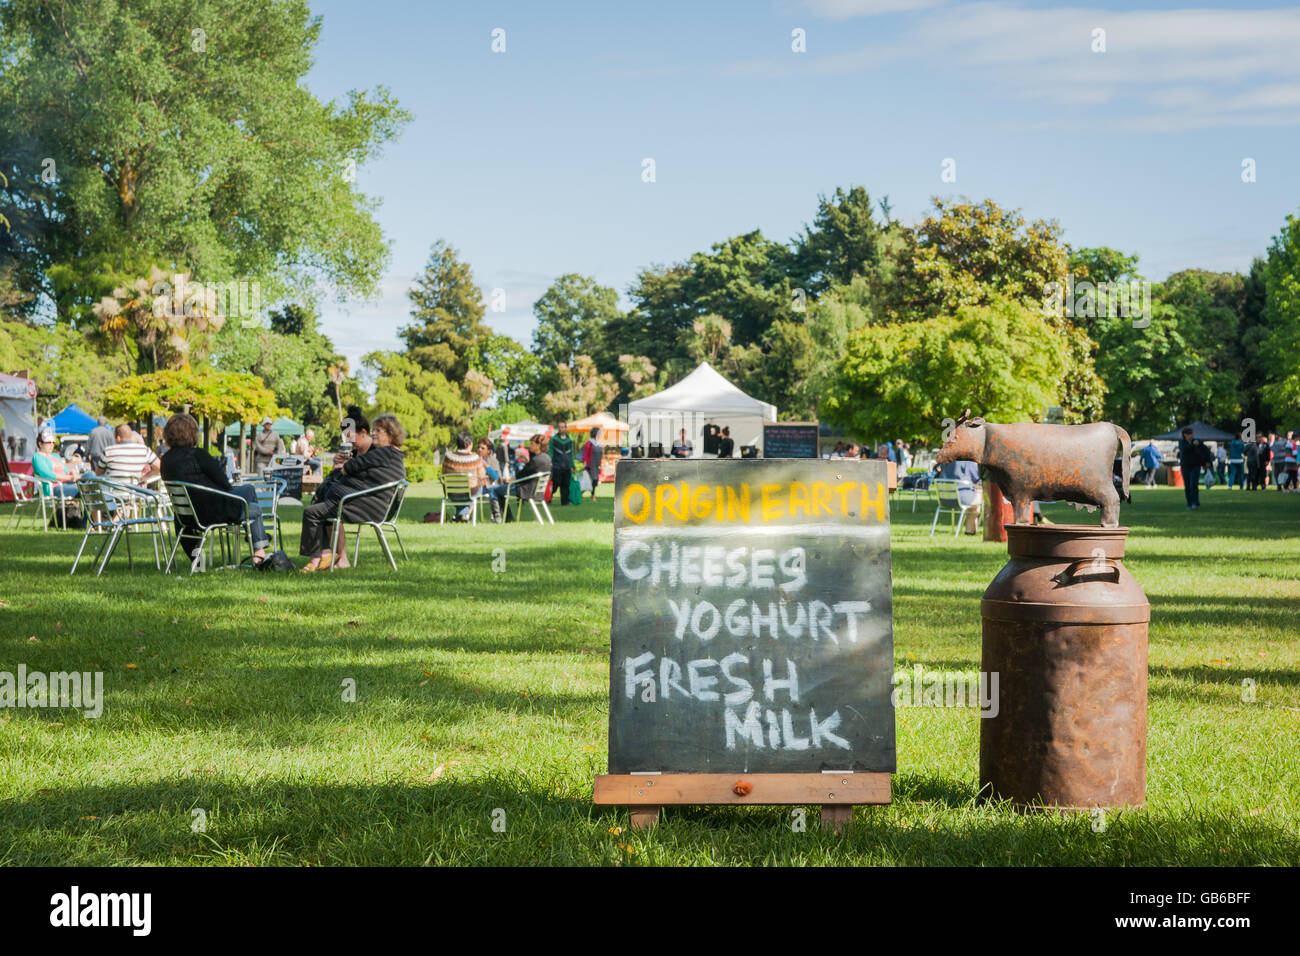 Weekend Farmers Market sign with groups of people sitting around tables relaxing in shade Stock Photo